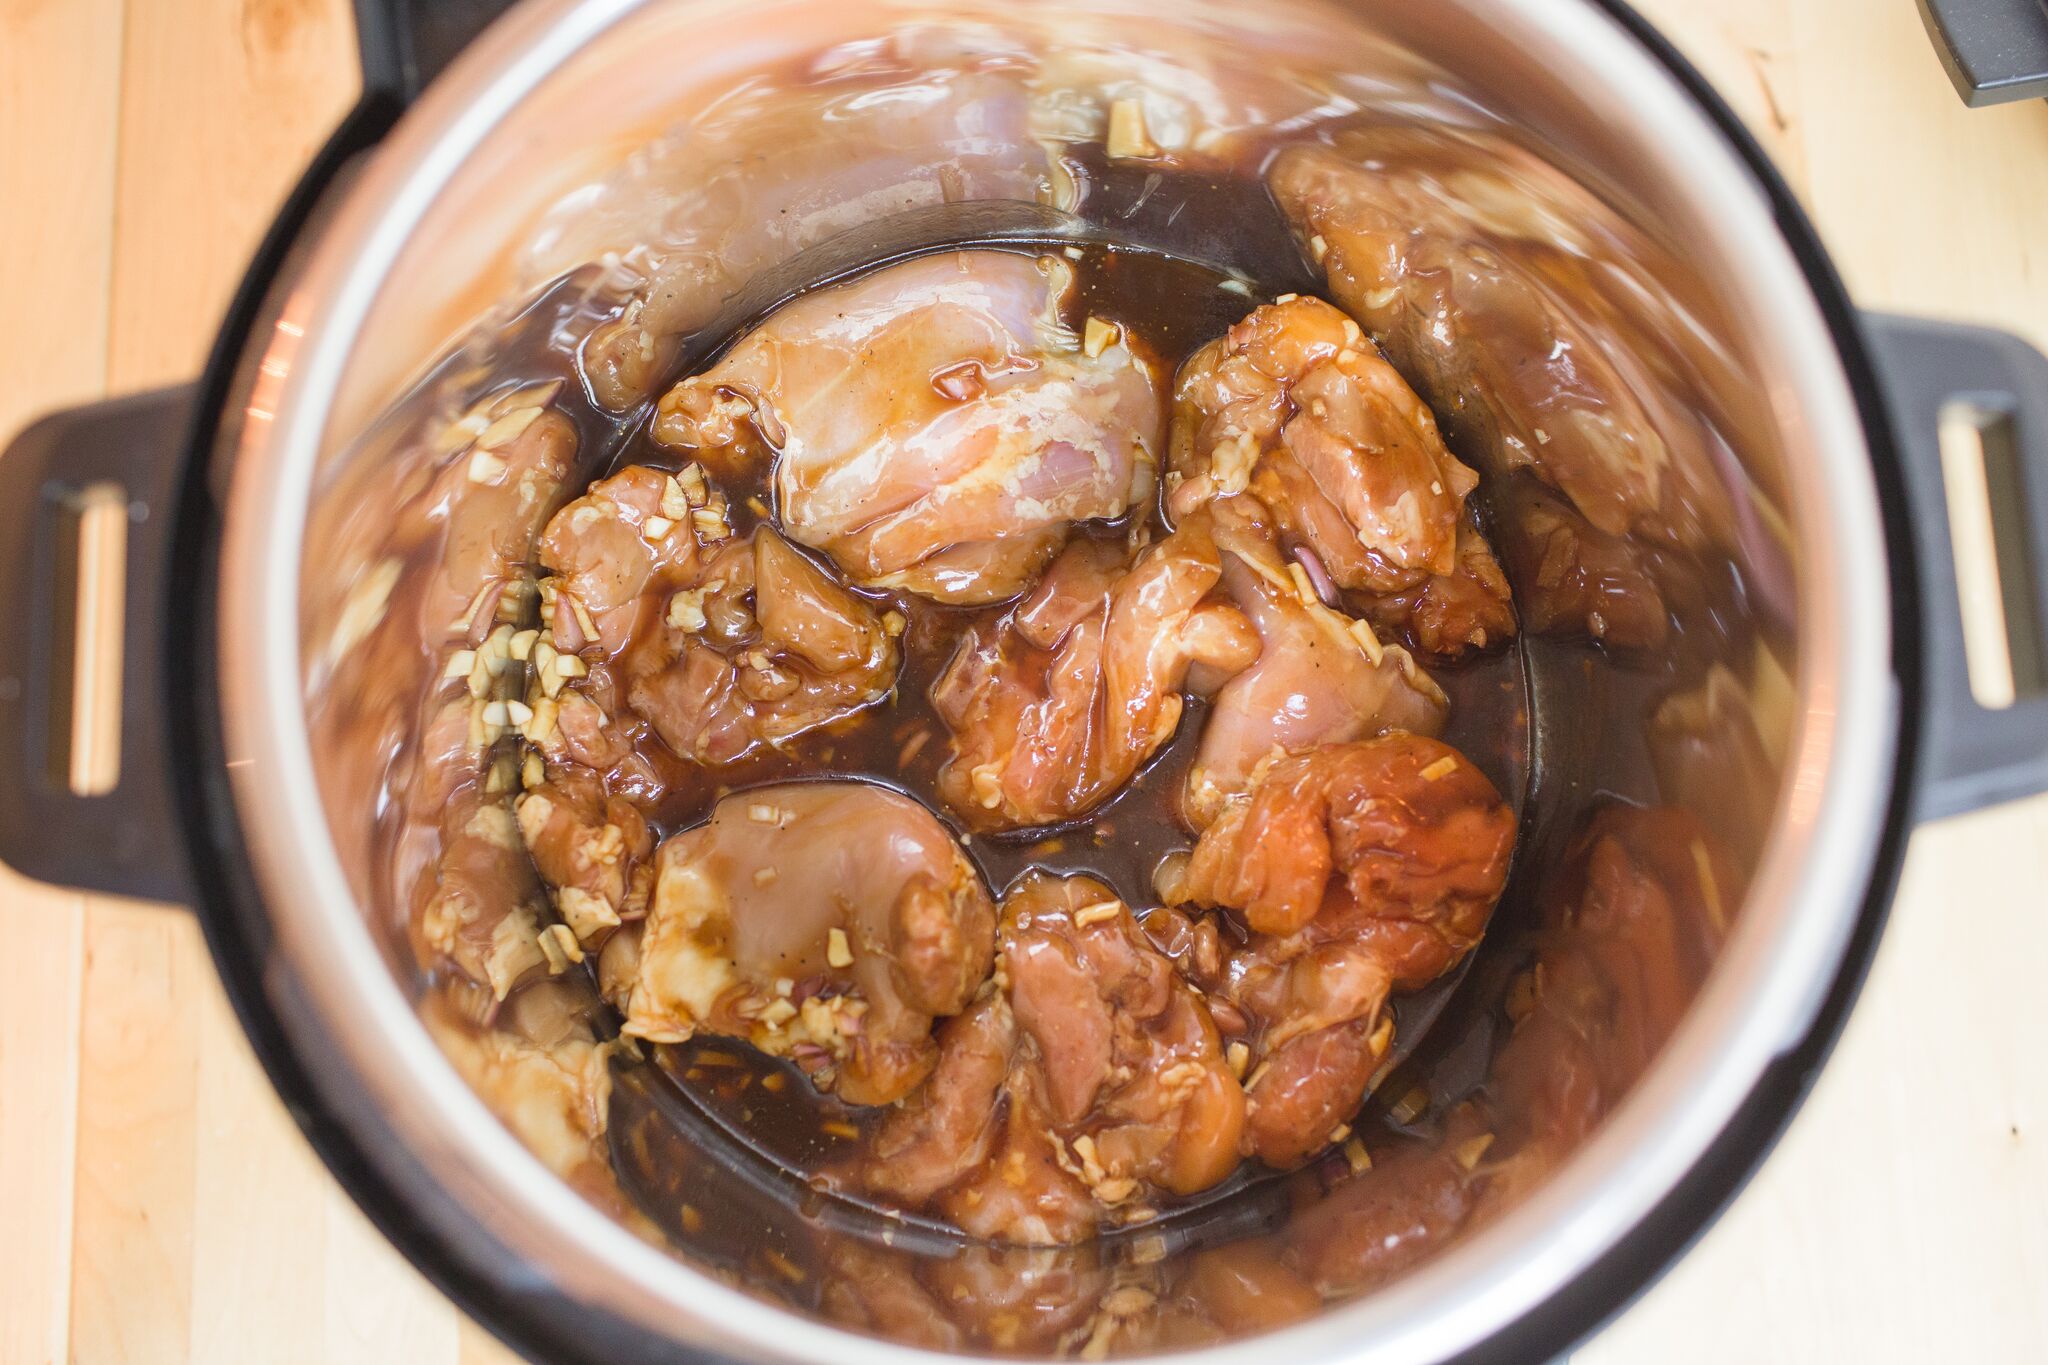 Chicken can also be cooked with marinade in Instant Pot.